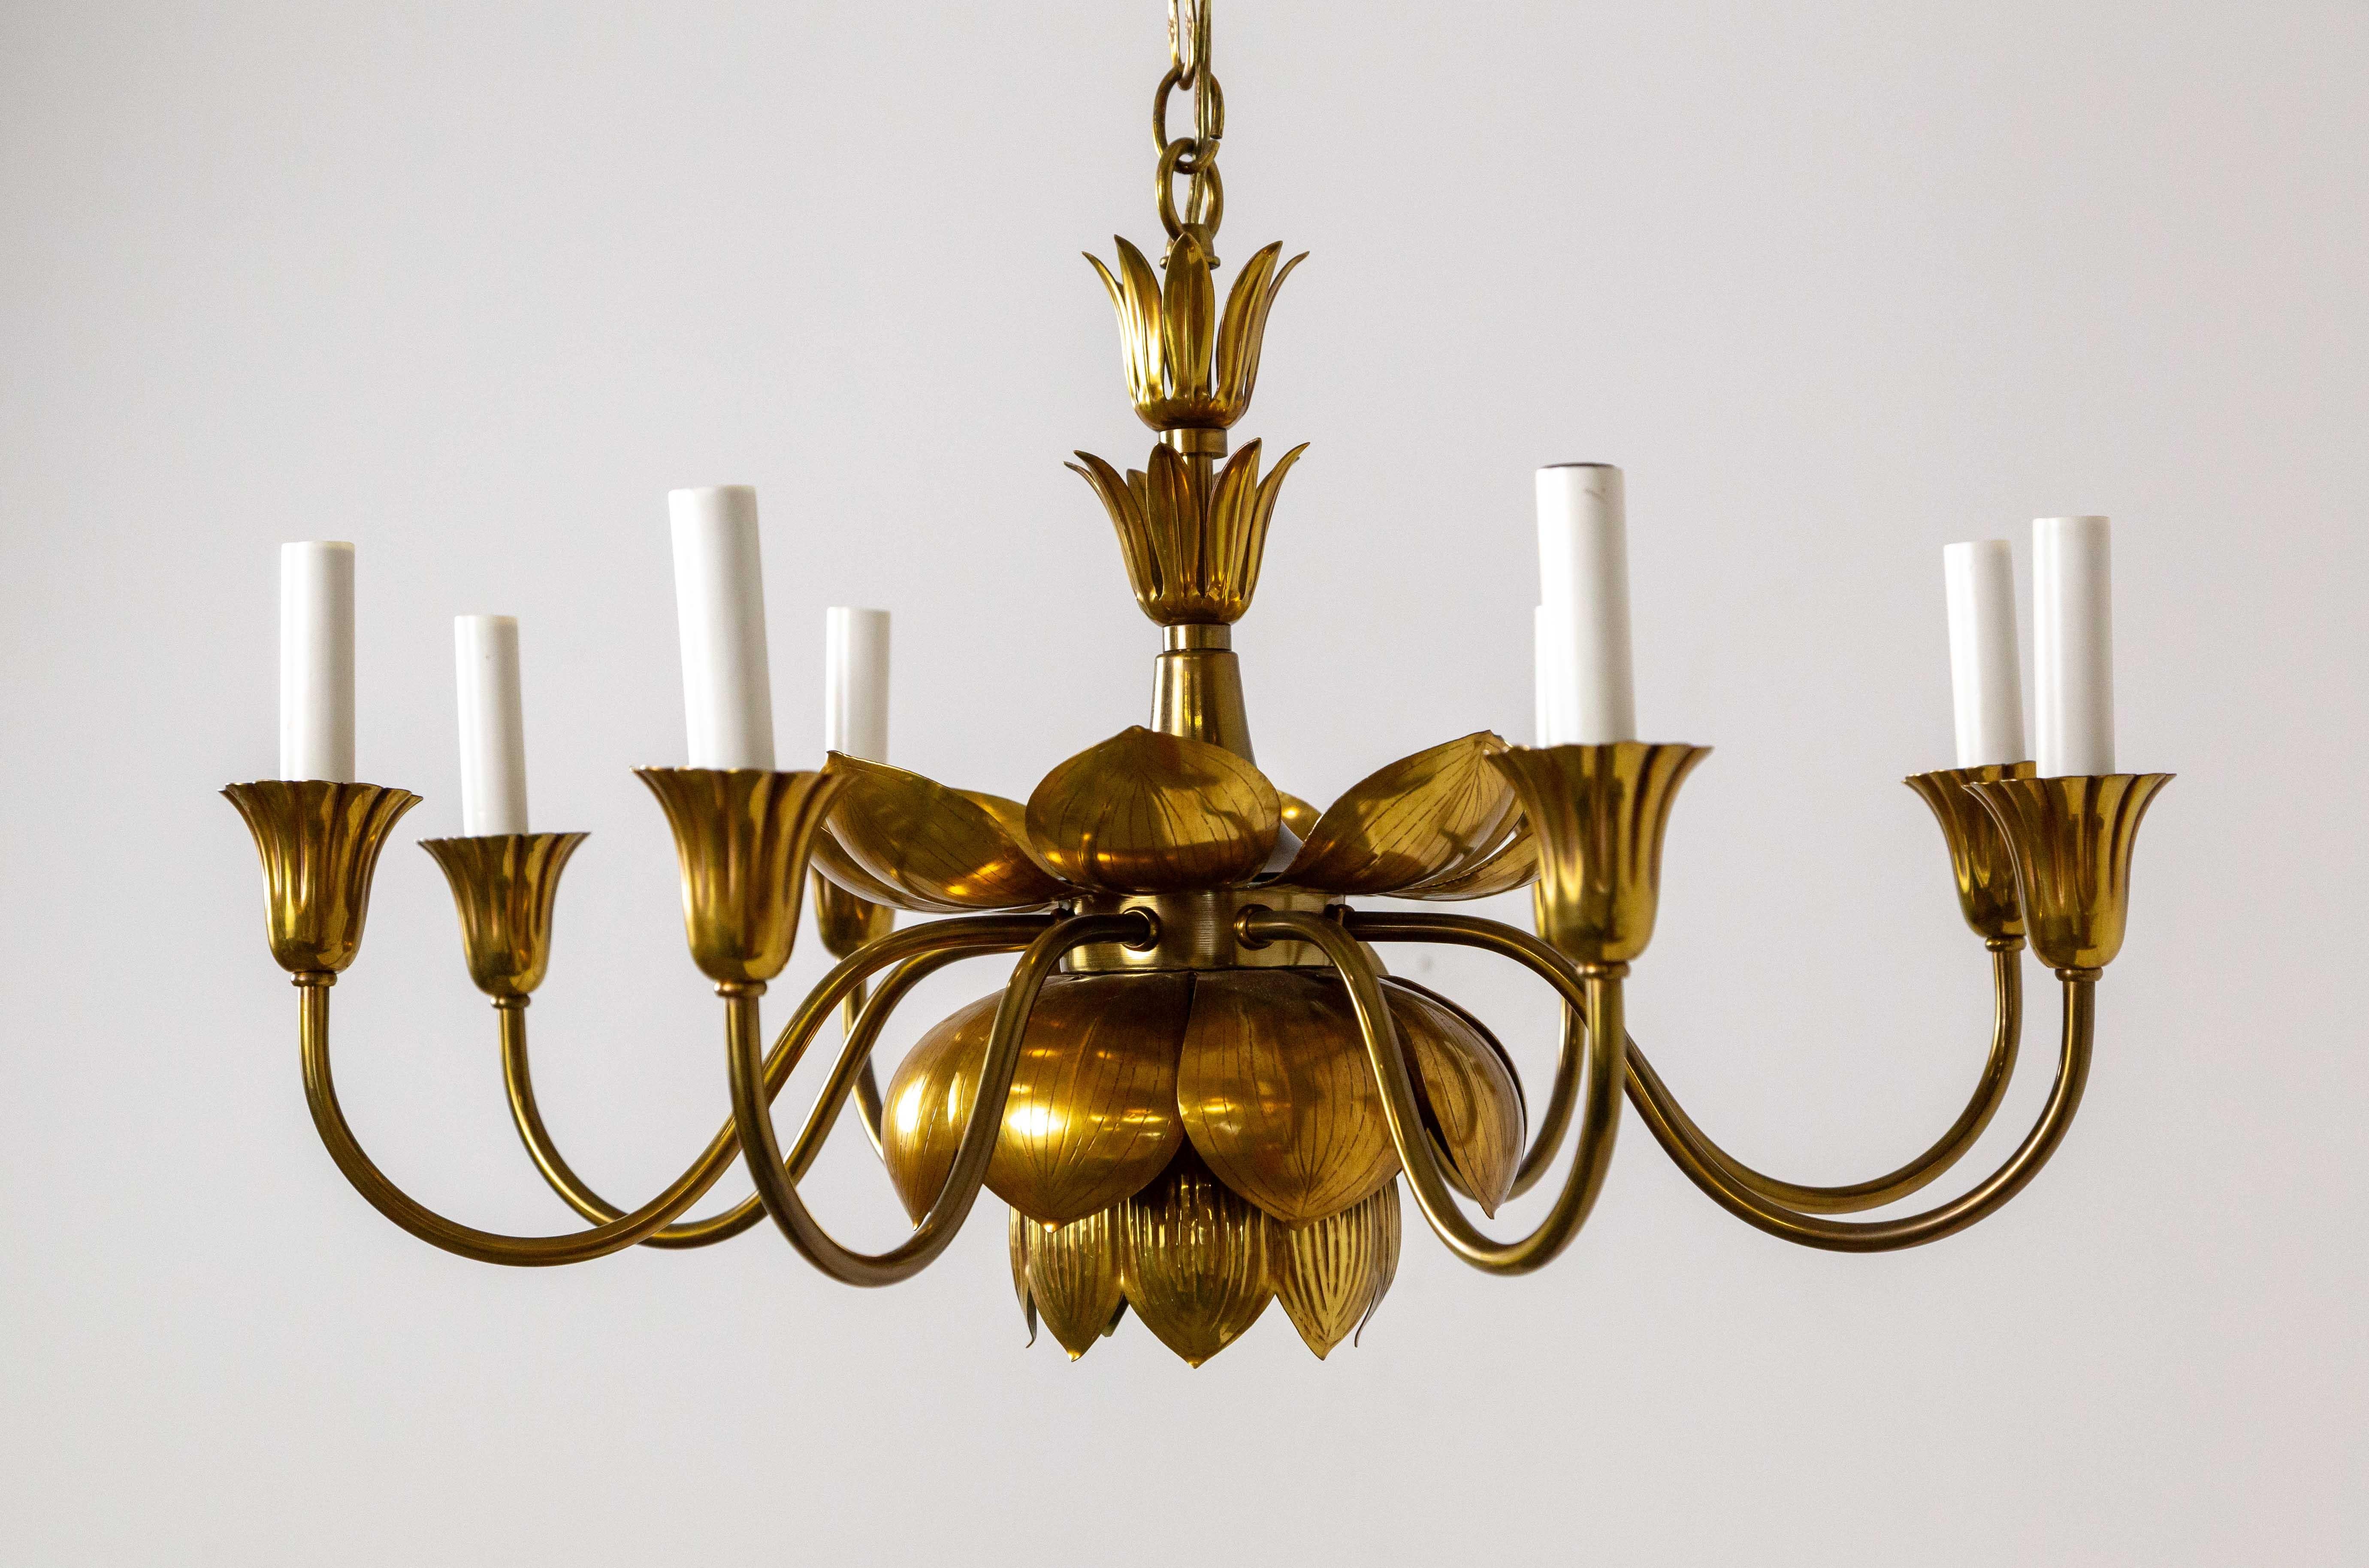 A sculptural, brass lotus chandelier produced by Feldman Company of Los Angeles, CA in the 1960s. This is a rare design- with 8 candlestick arms- as opposed to the smaller, pendant version.  It's a beautiful Hollywood Regency fixture in the style of